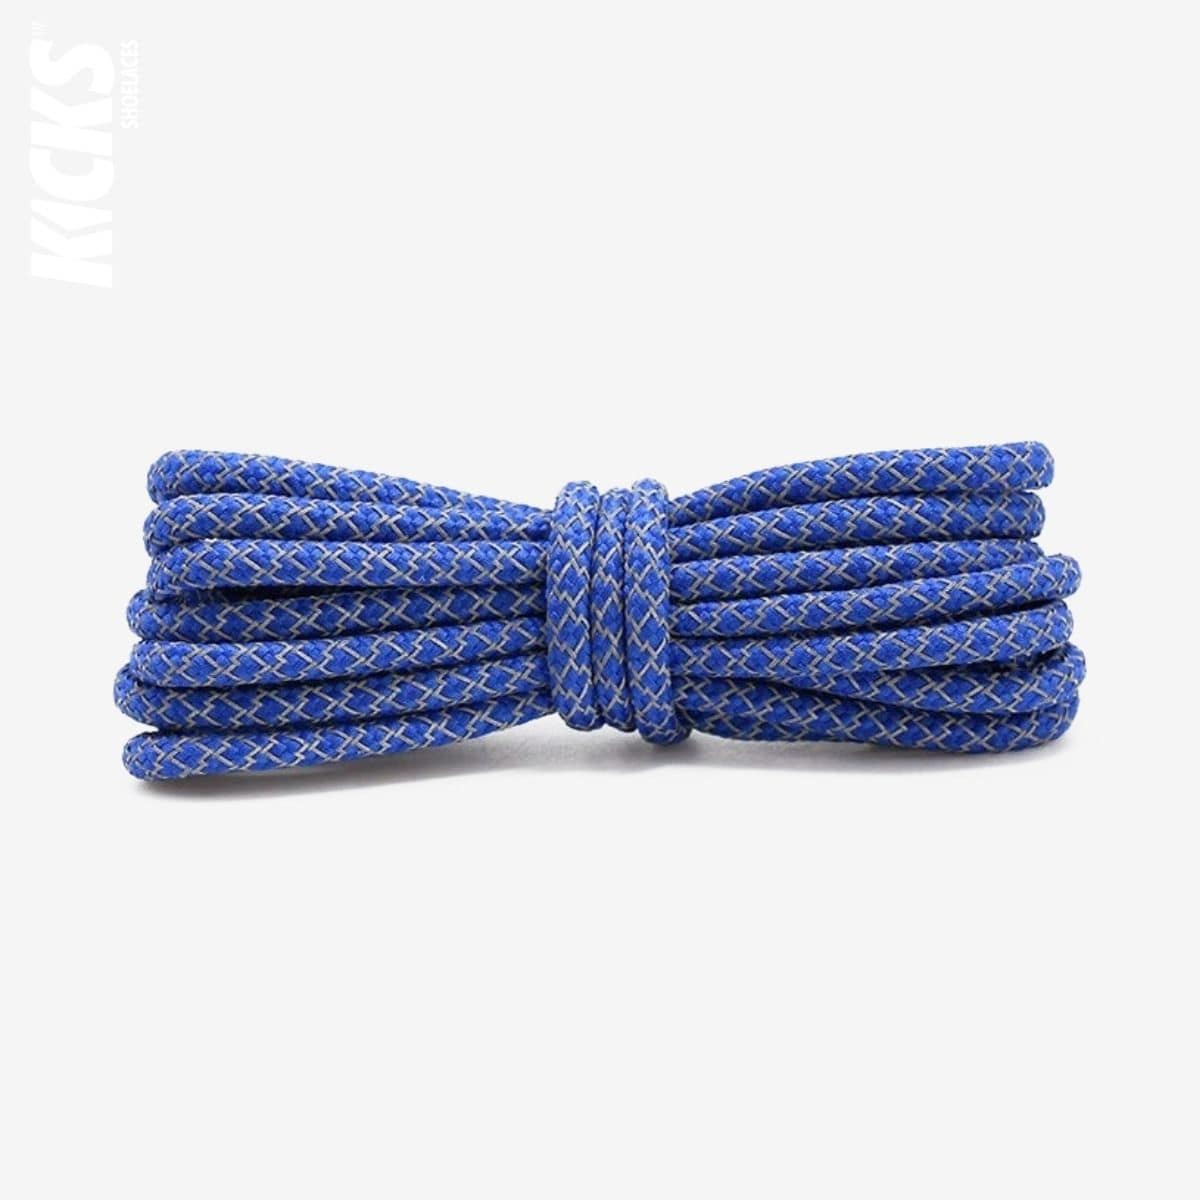 round-shoelaces-for-sneakers-in-royal-blue